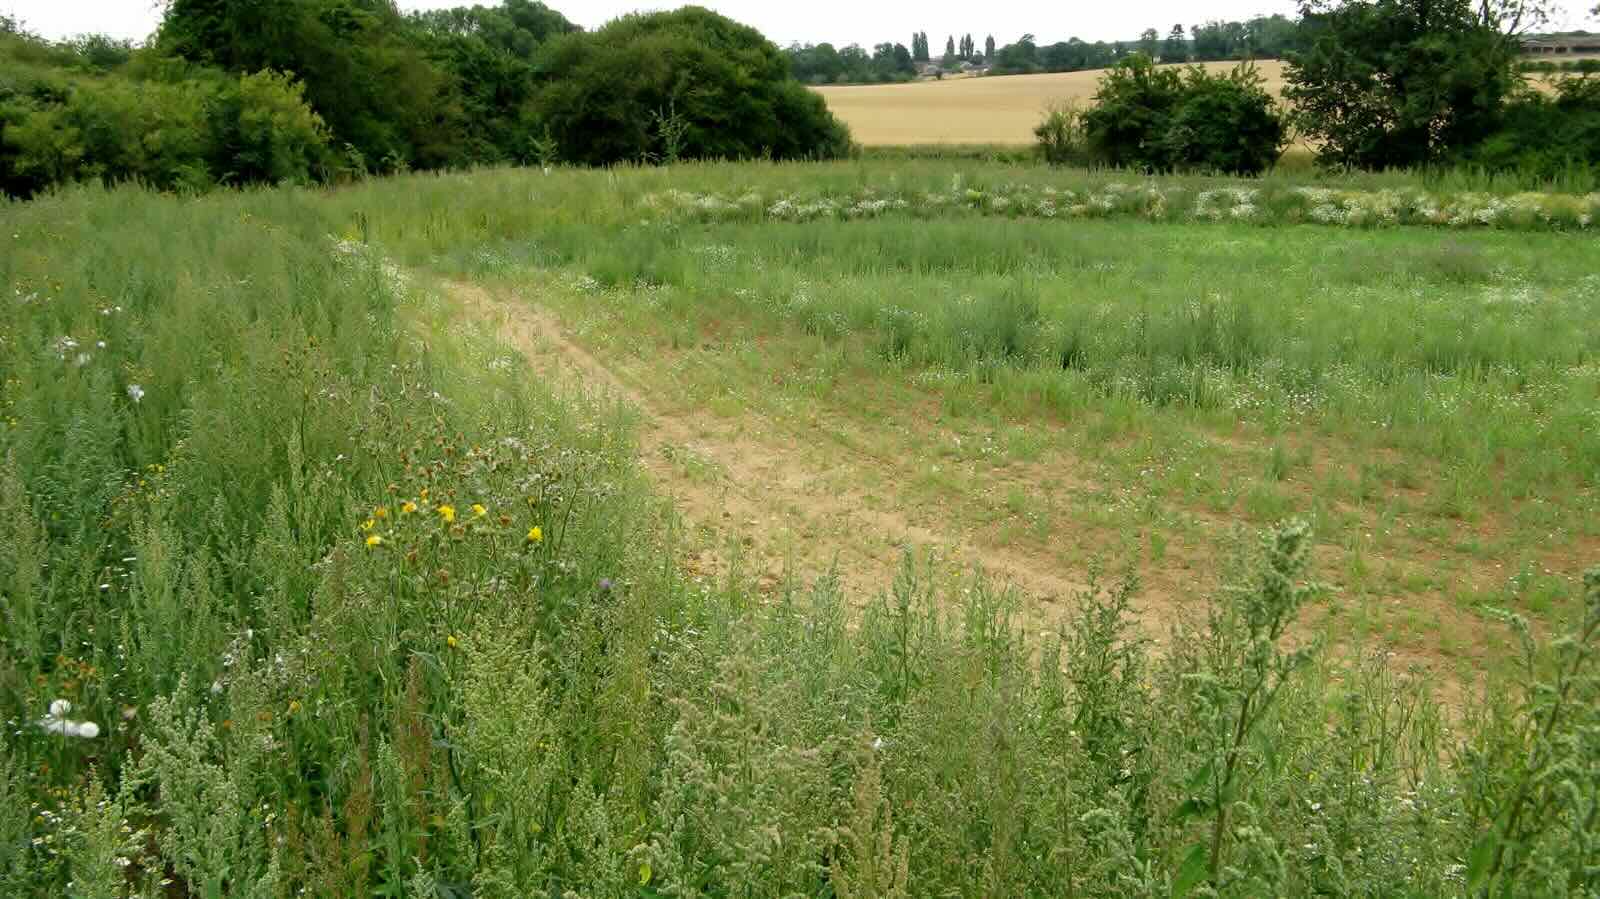 How Does Paving Over A Grass Meadow Affect The Watershed